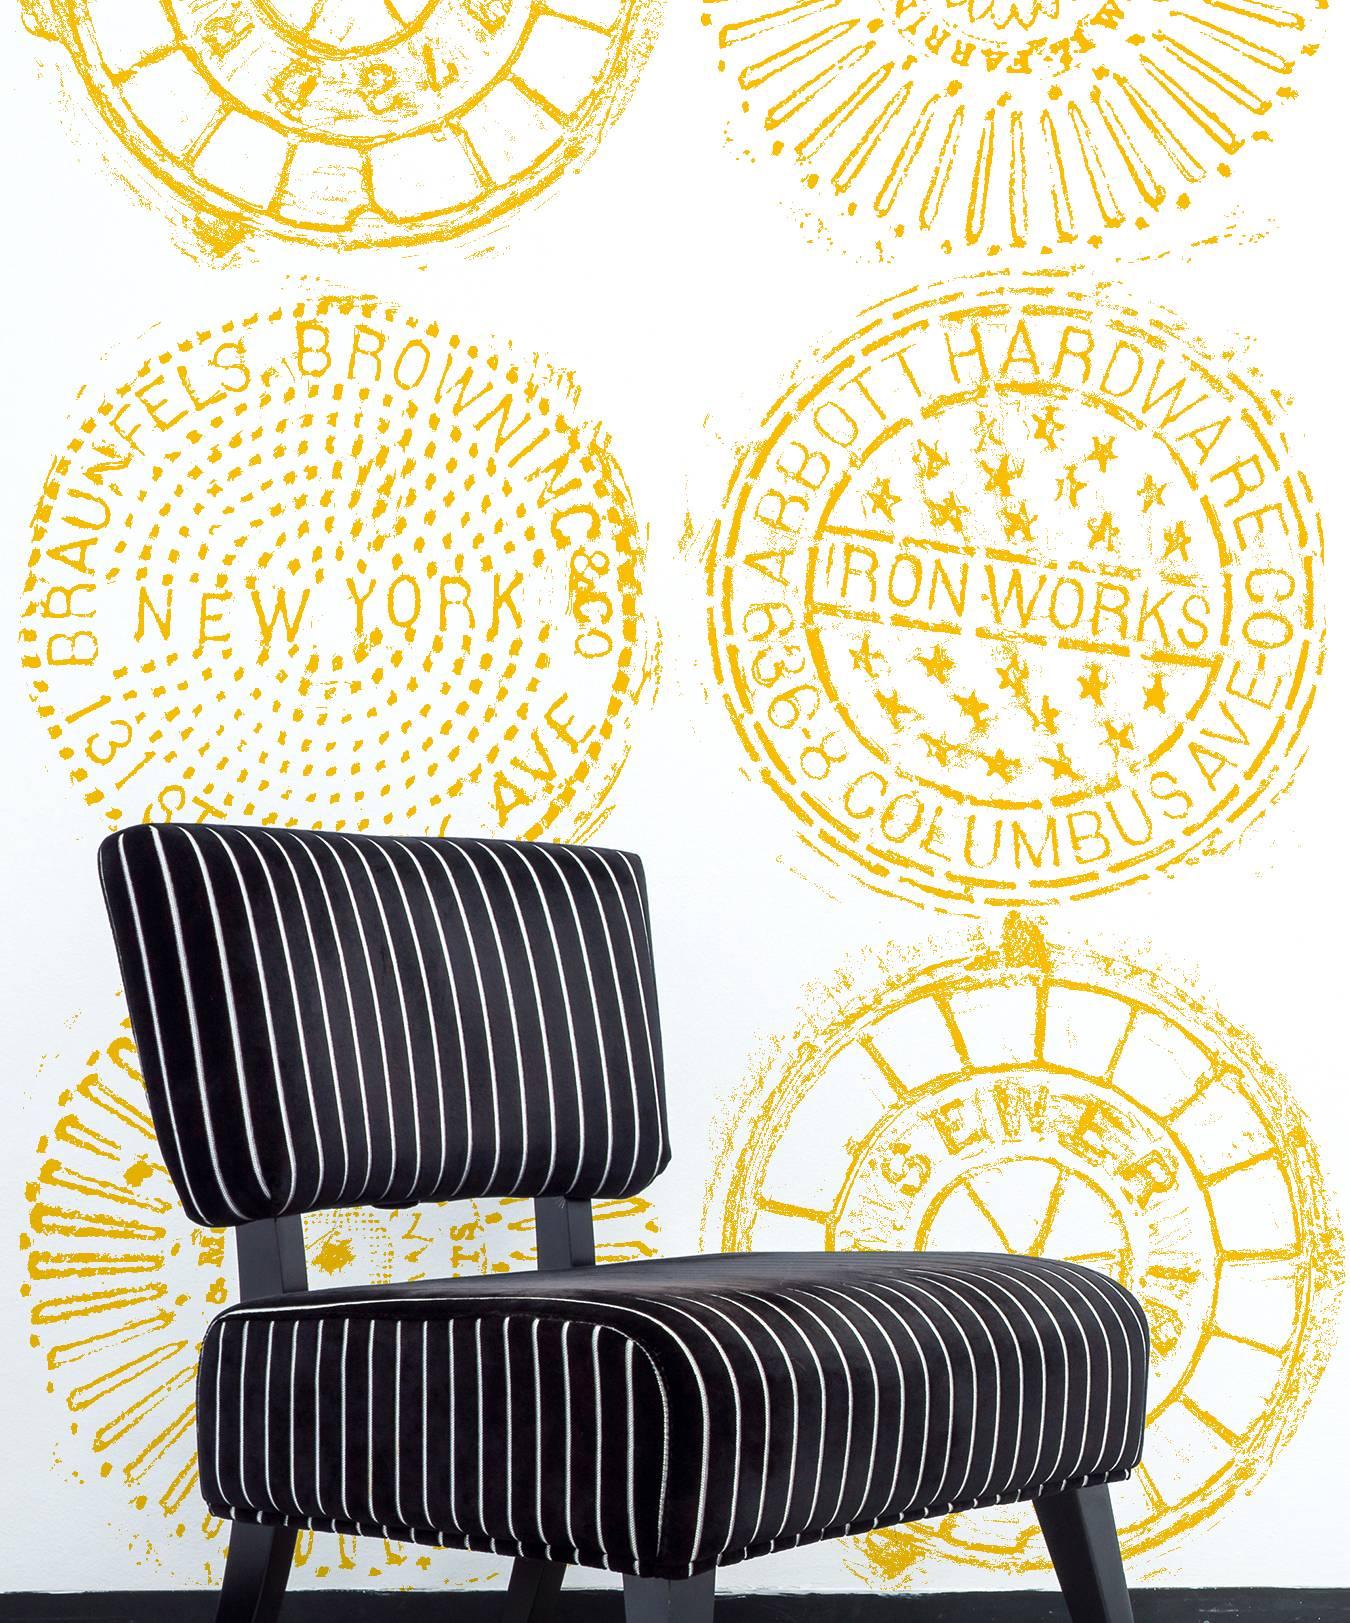 NYC Manhole Printed Wallpaper, Black on White Manhole Cover For Sale 1